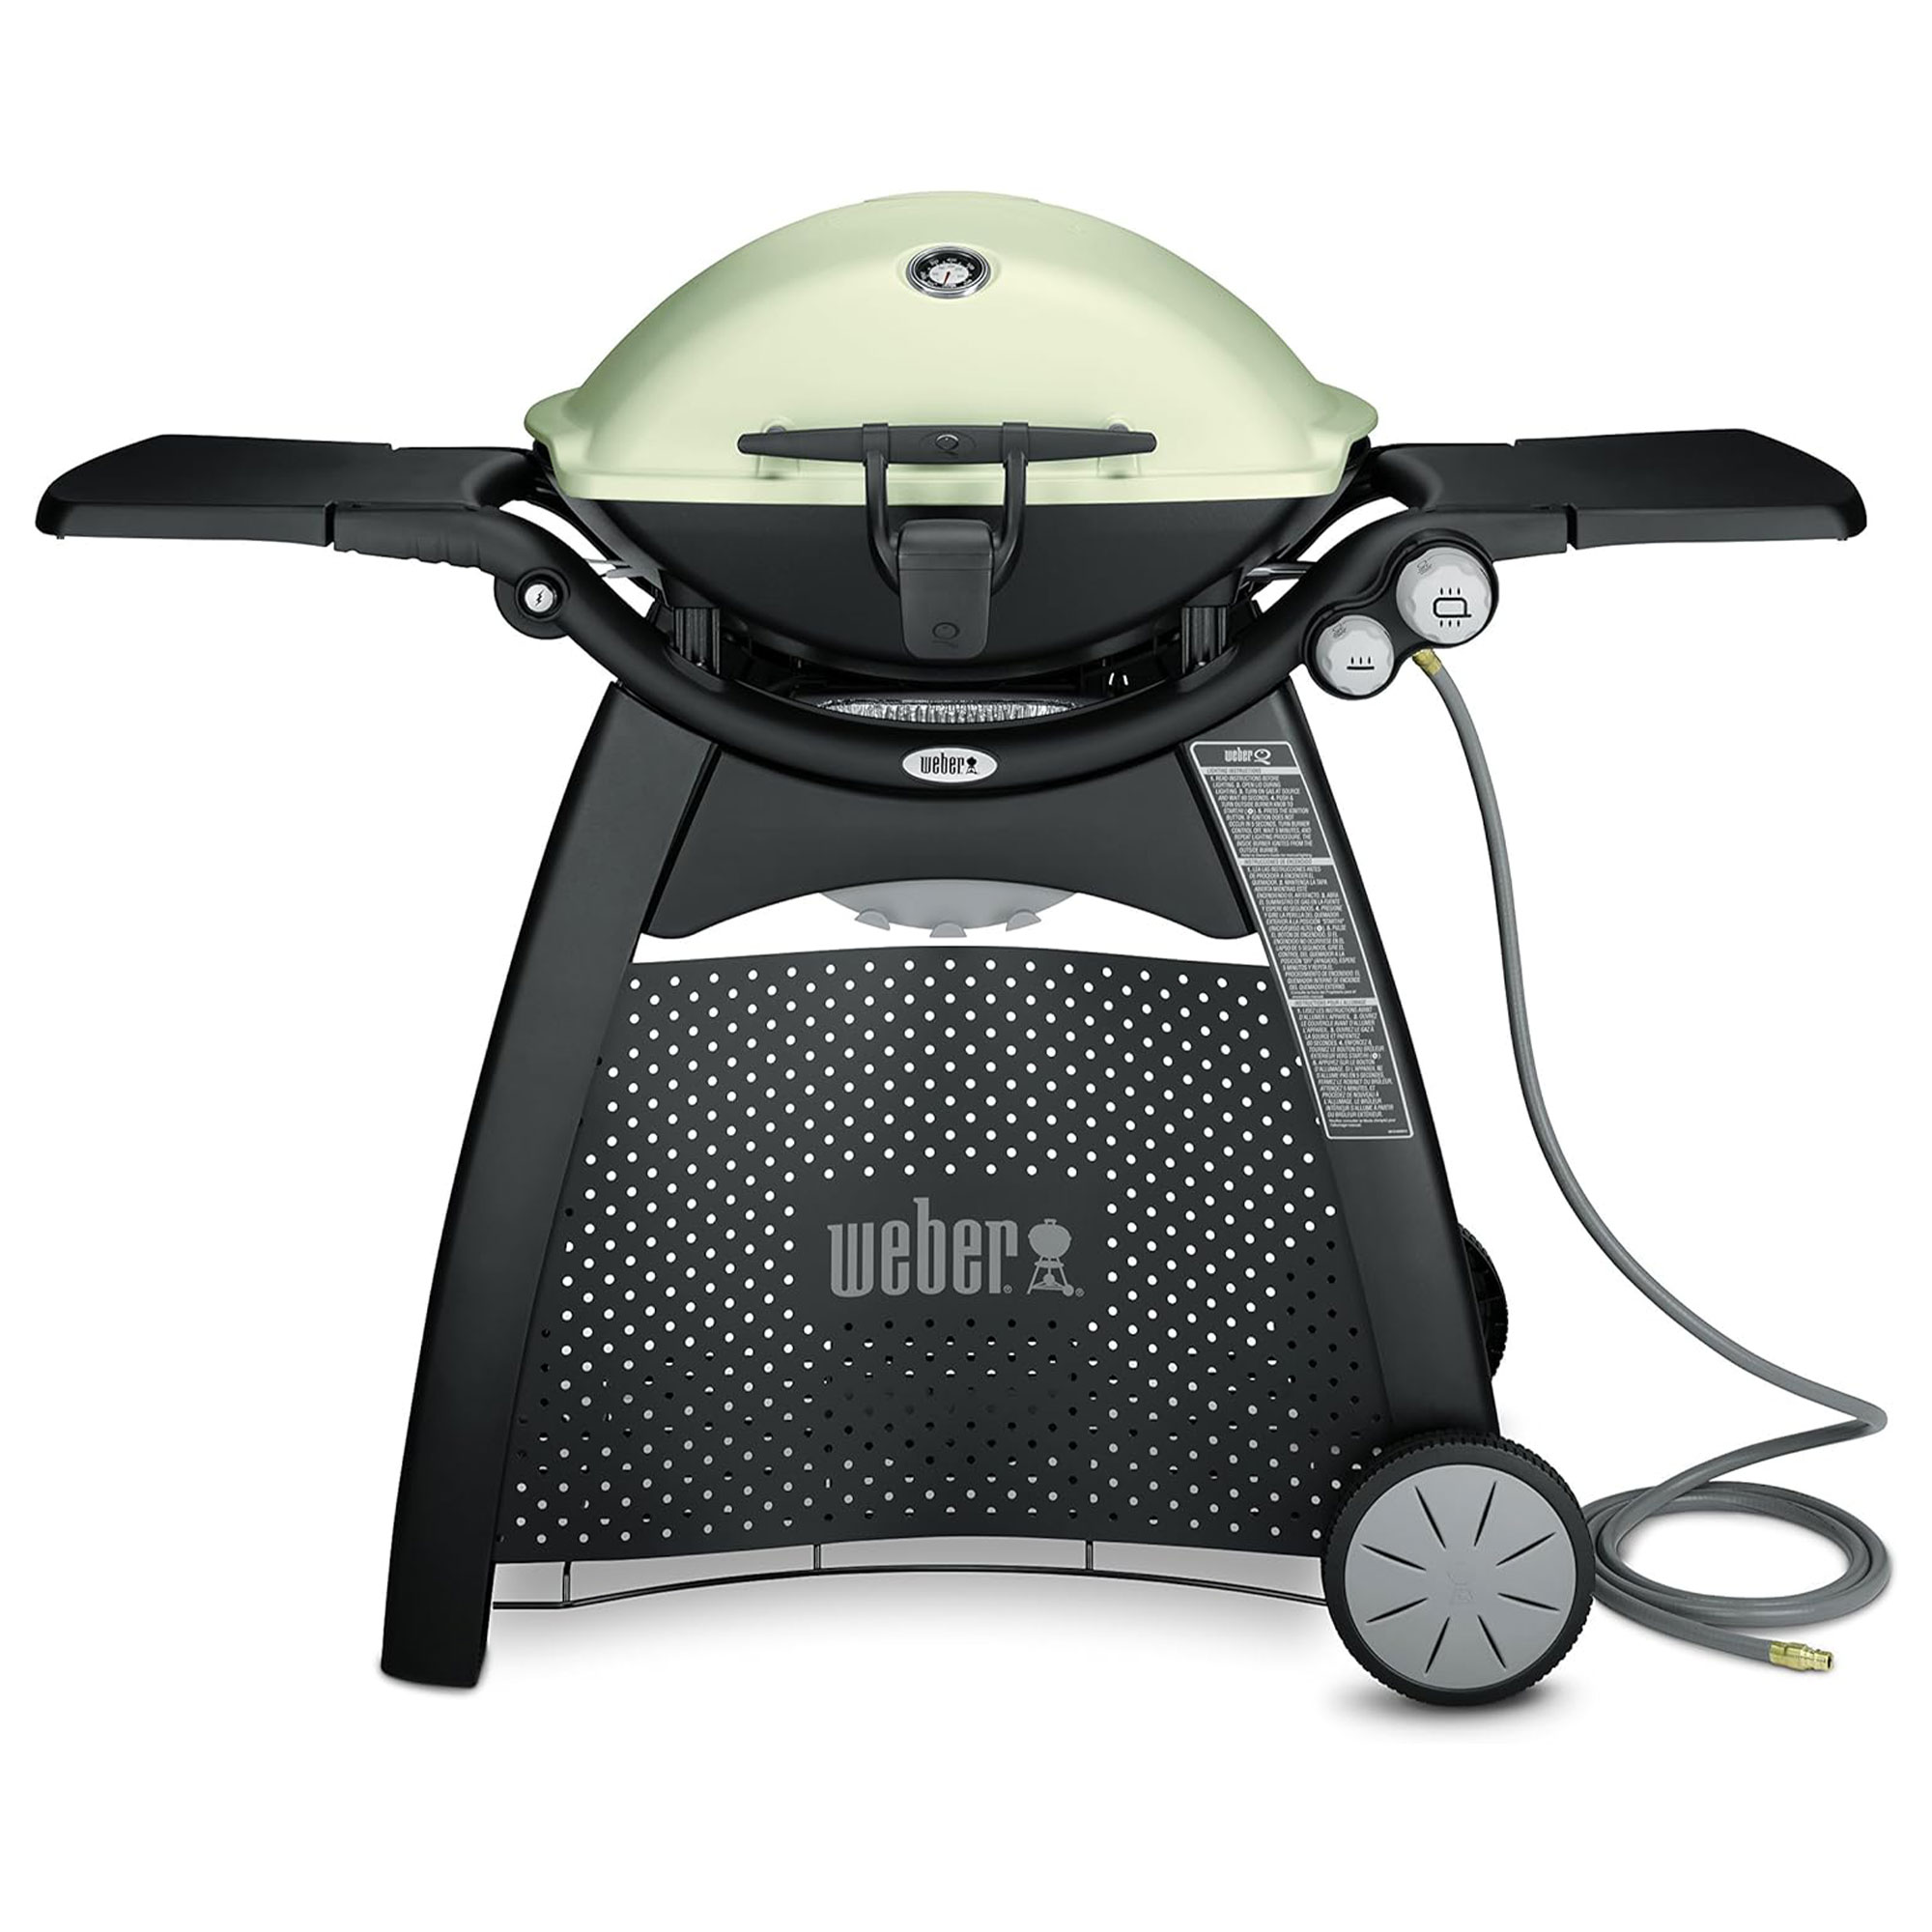 Weber-stephen Products Weber Q3200 NG Grill - image 1 of 11